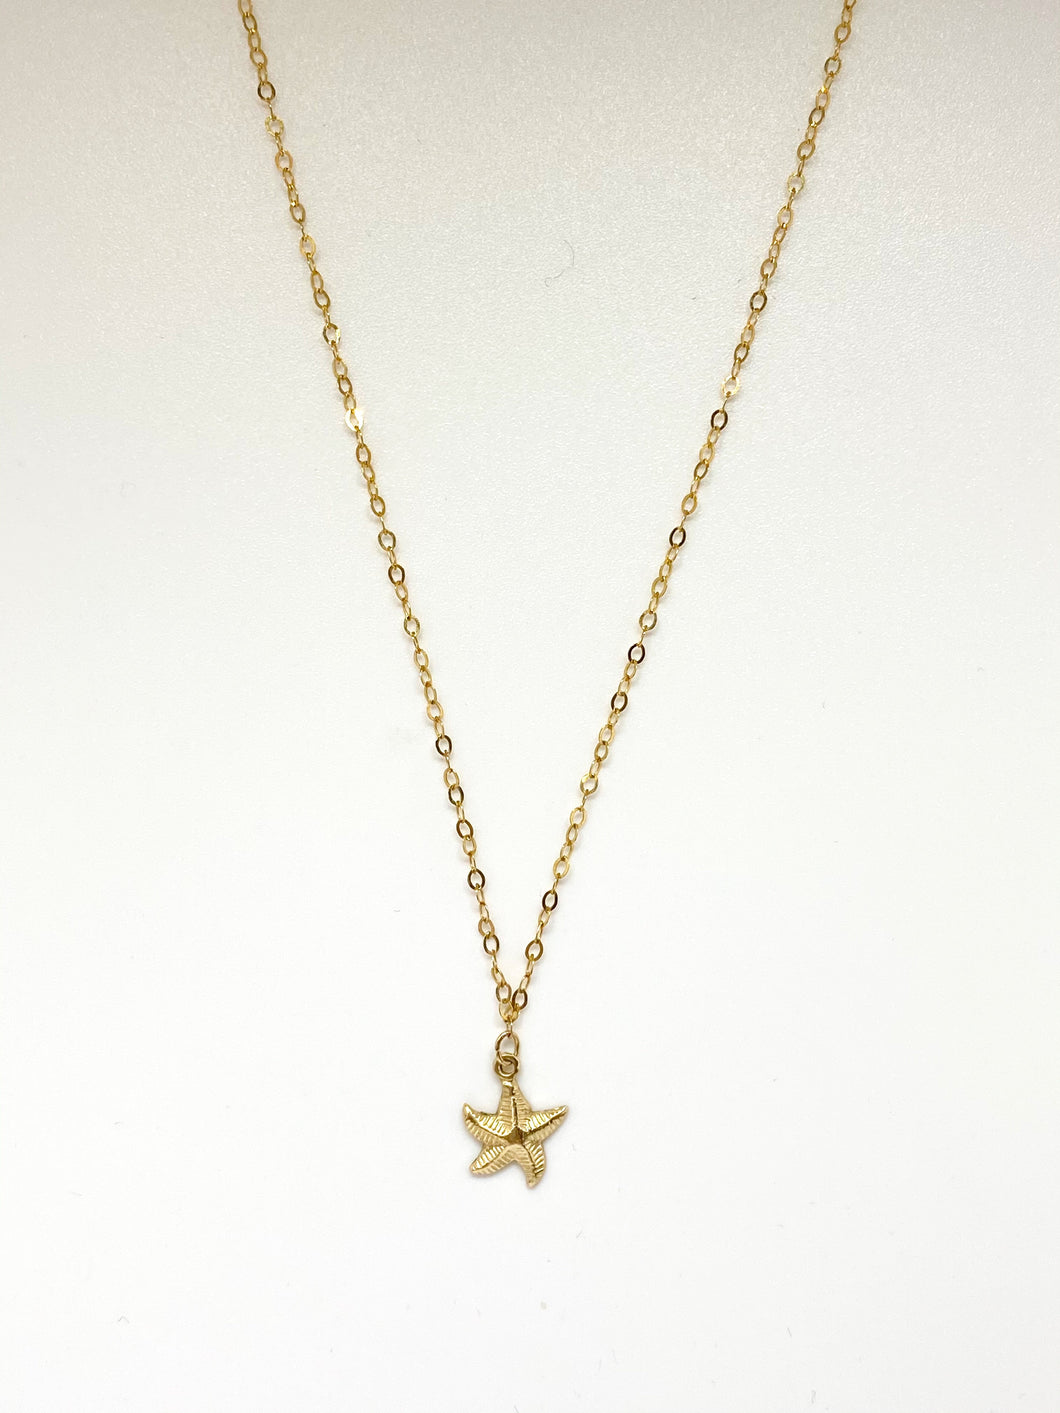 the dainty starfish necklace